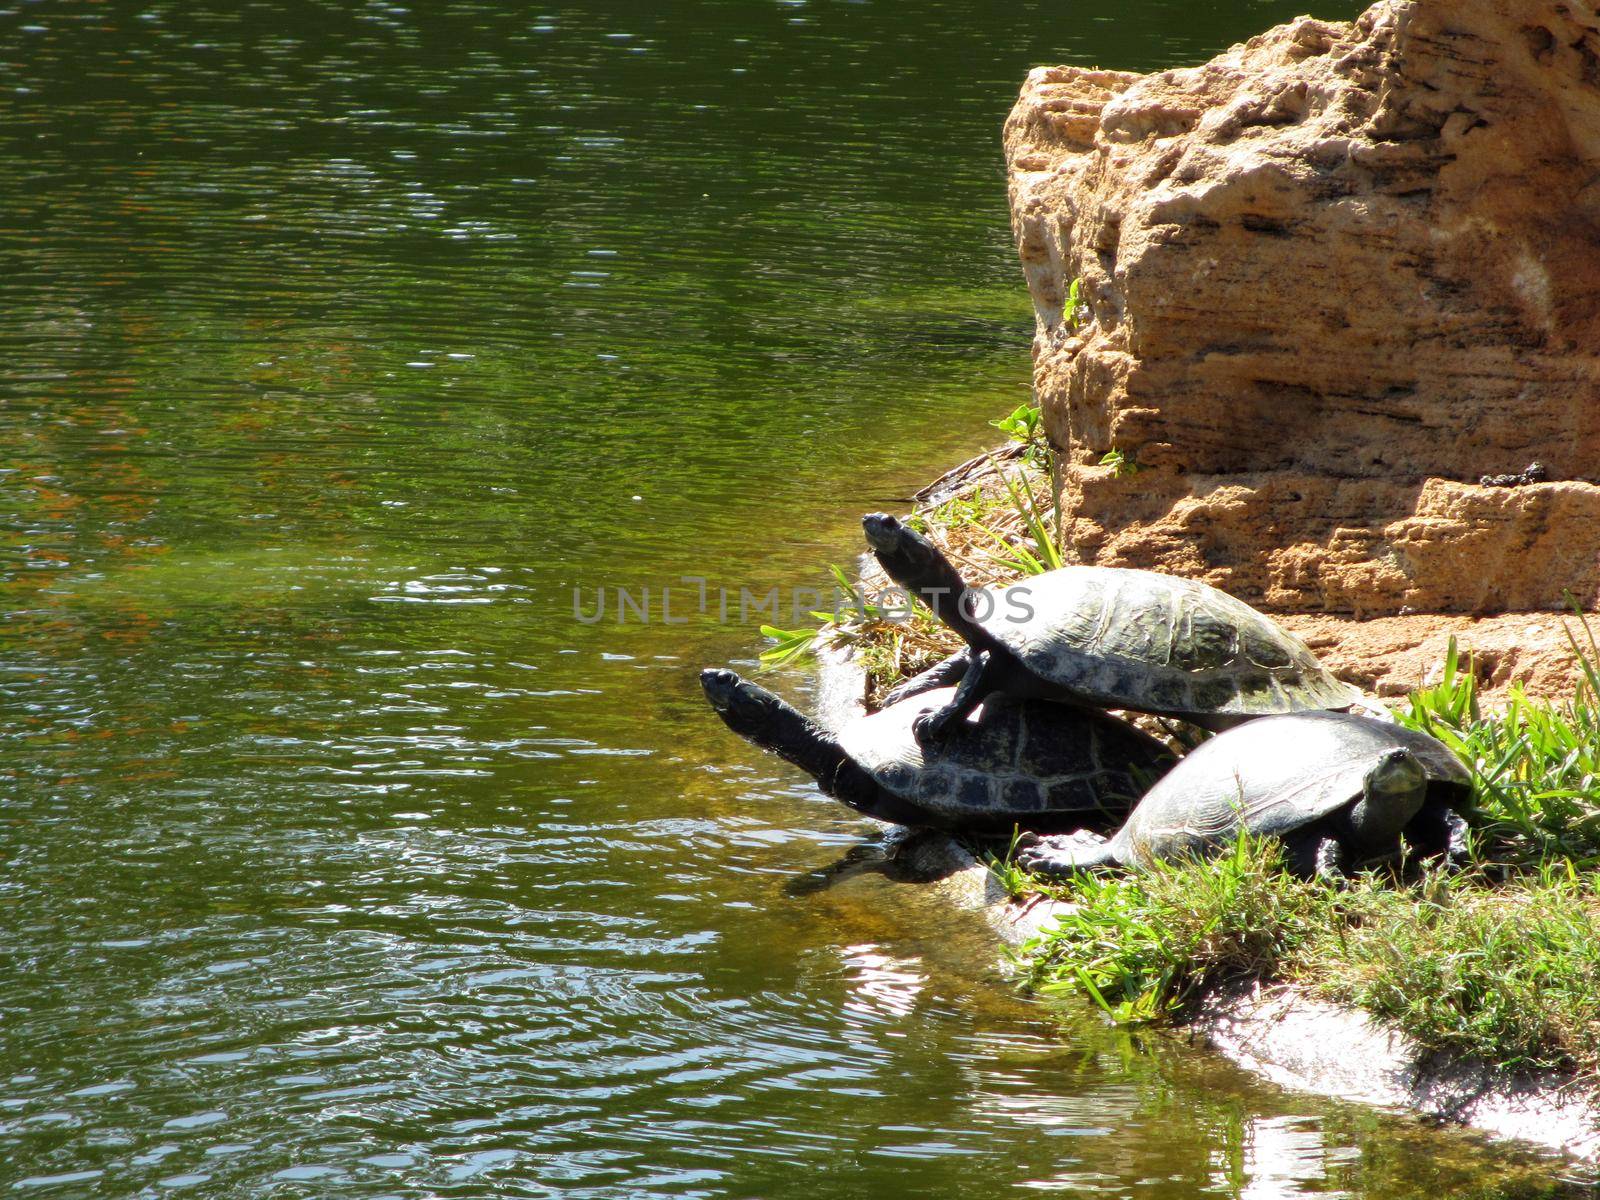 One Turtles stand on top another turtles back by EricGBVD